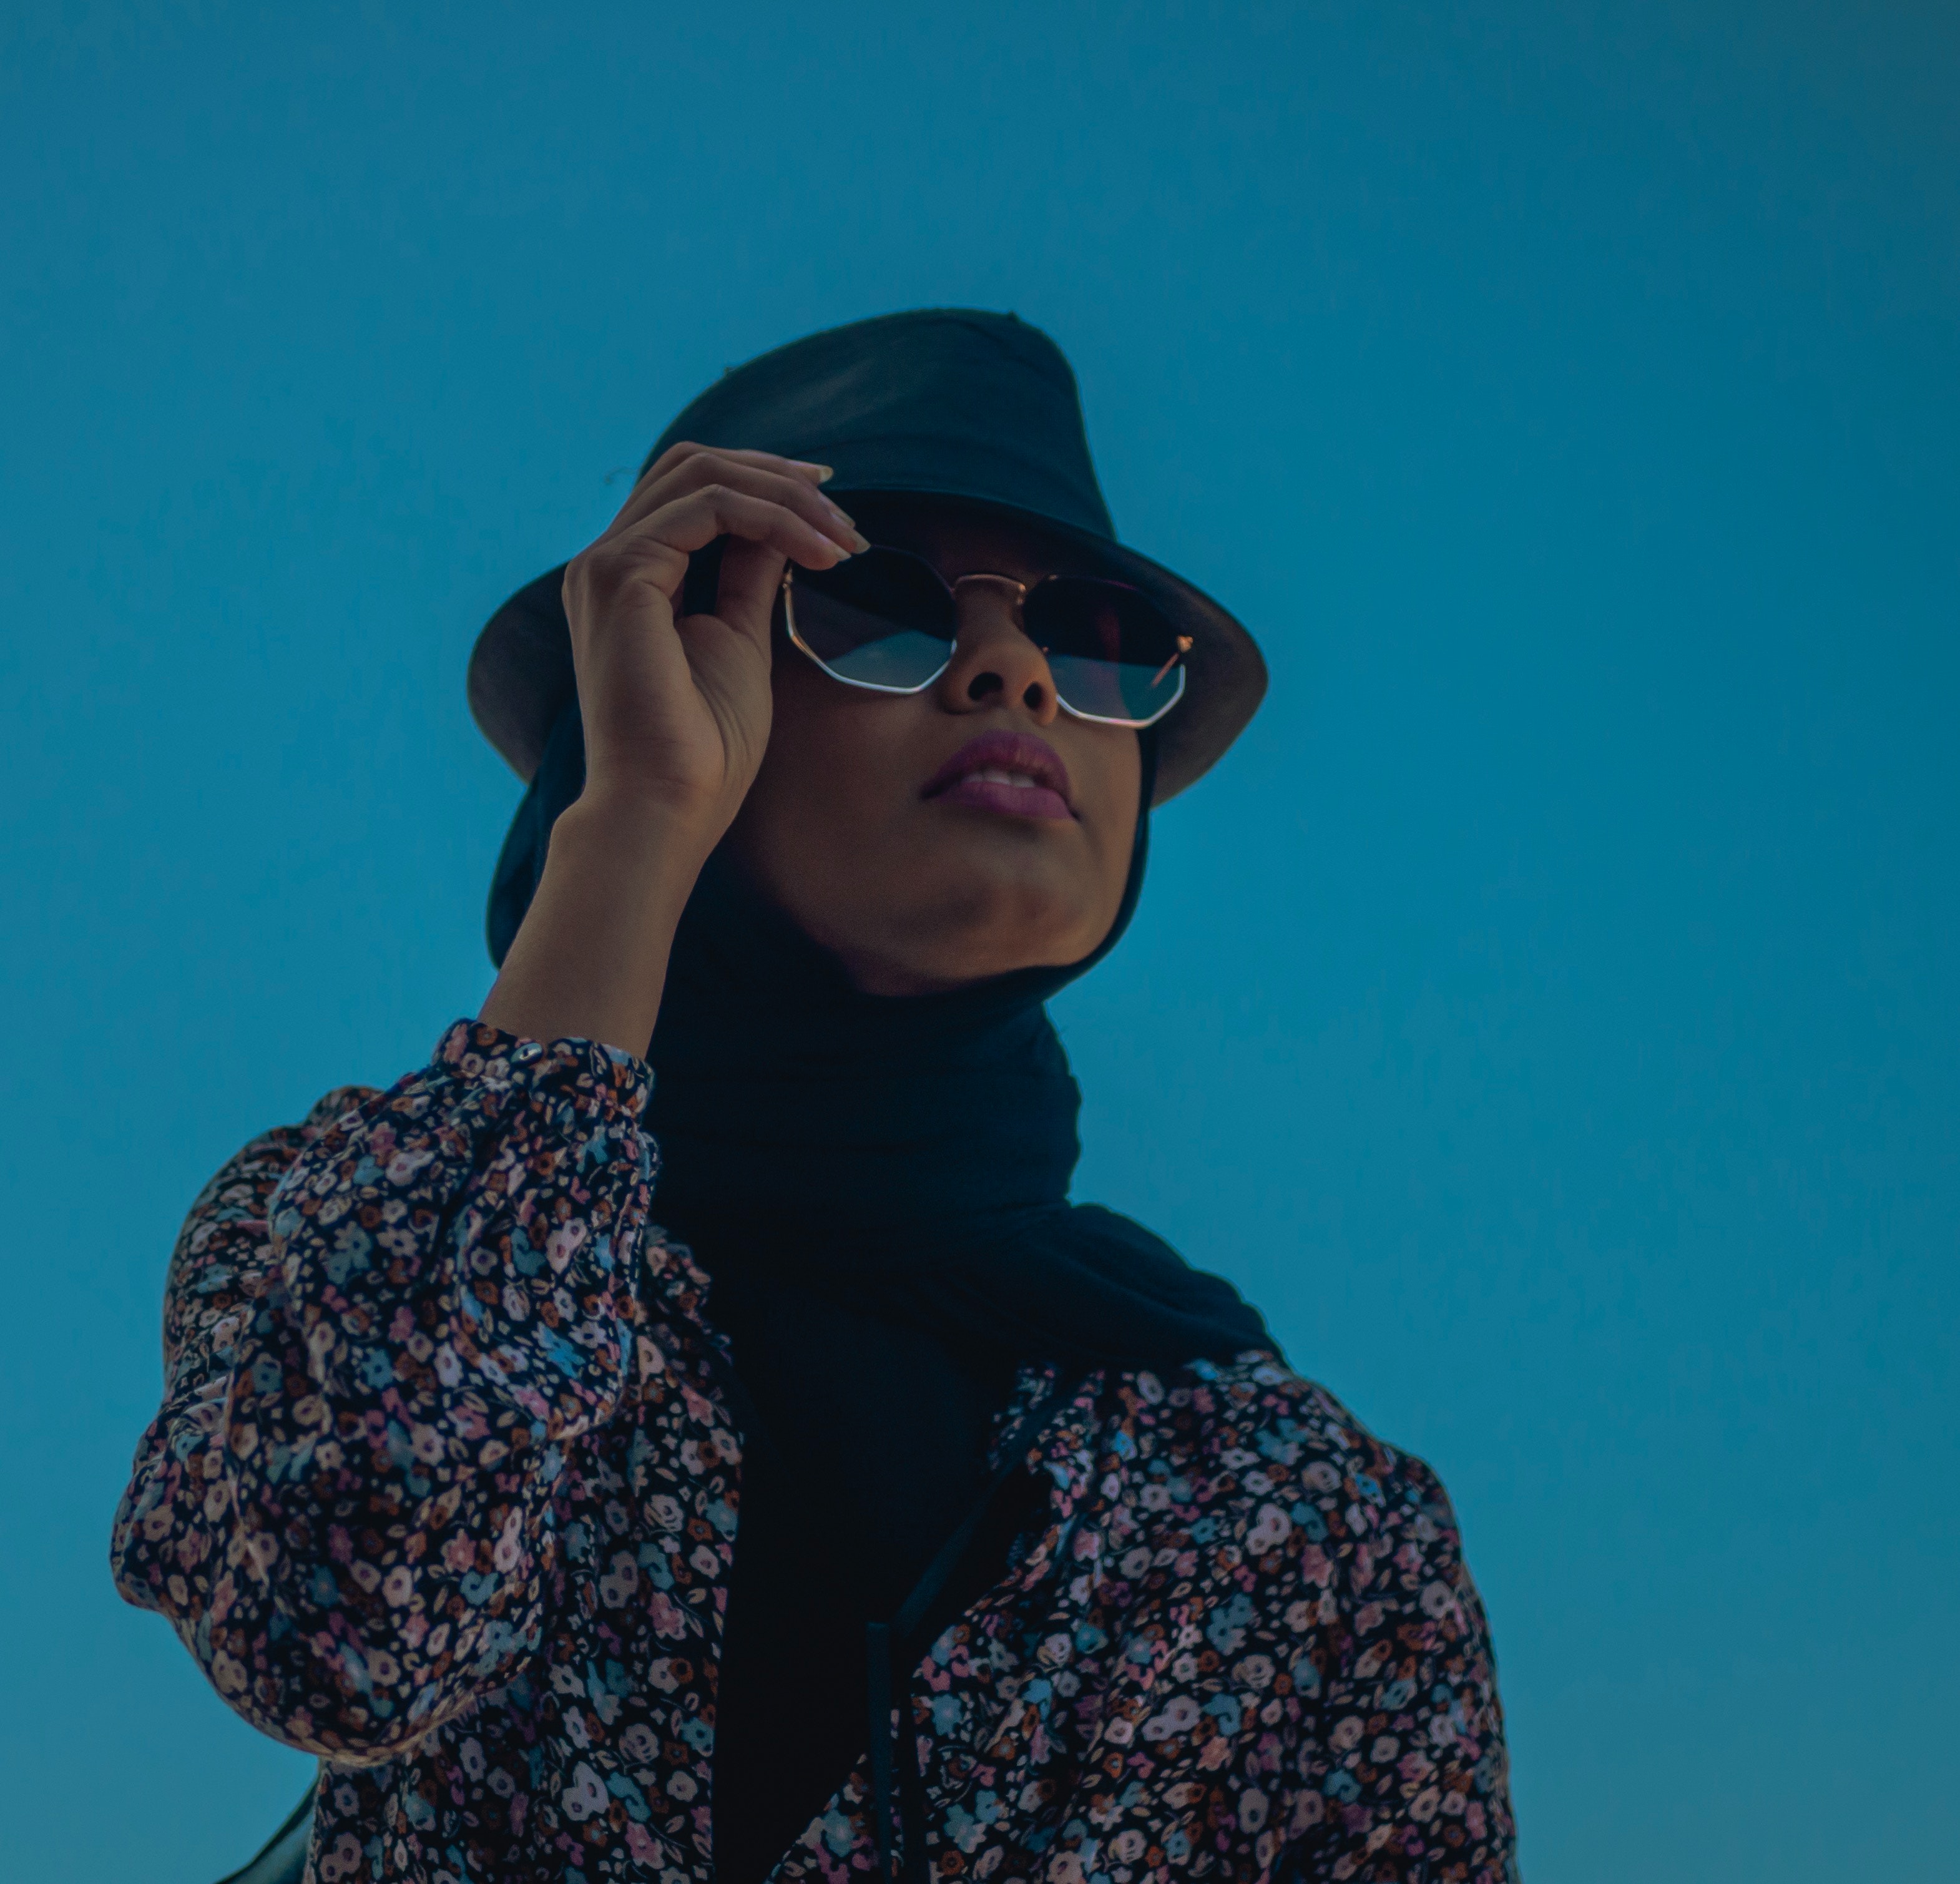 A woman with a hat and glasses. | Source: Pexels